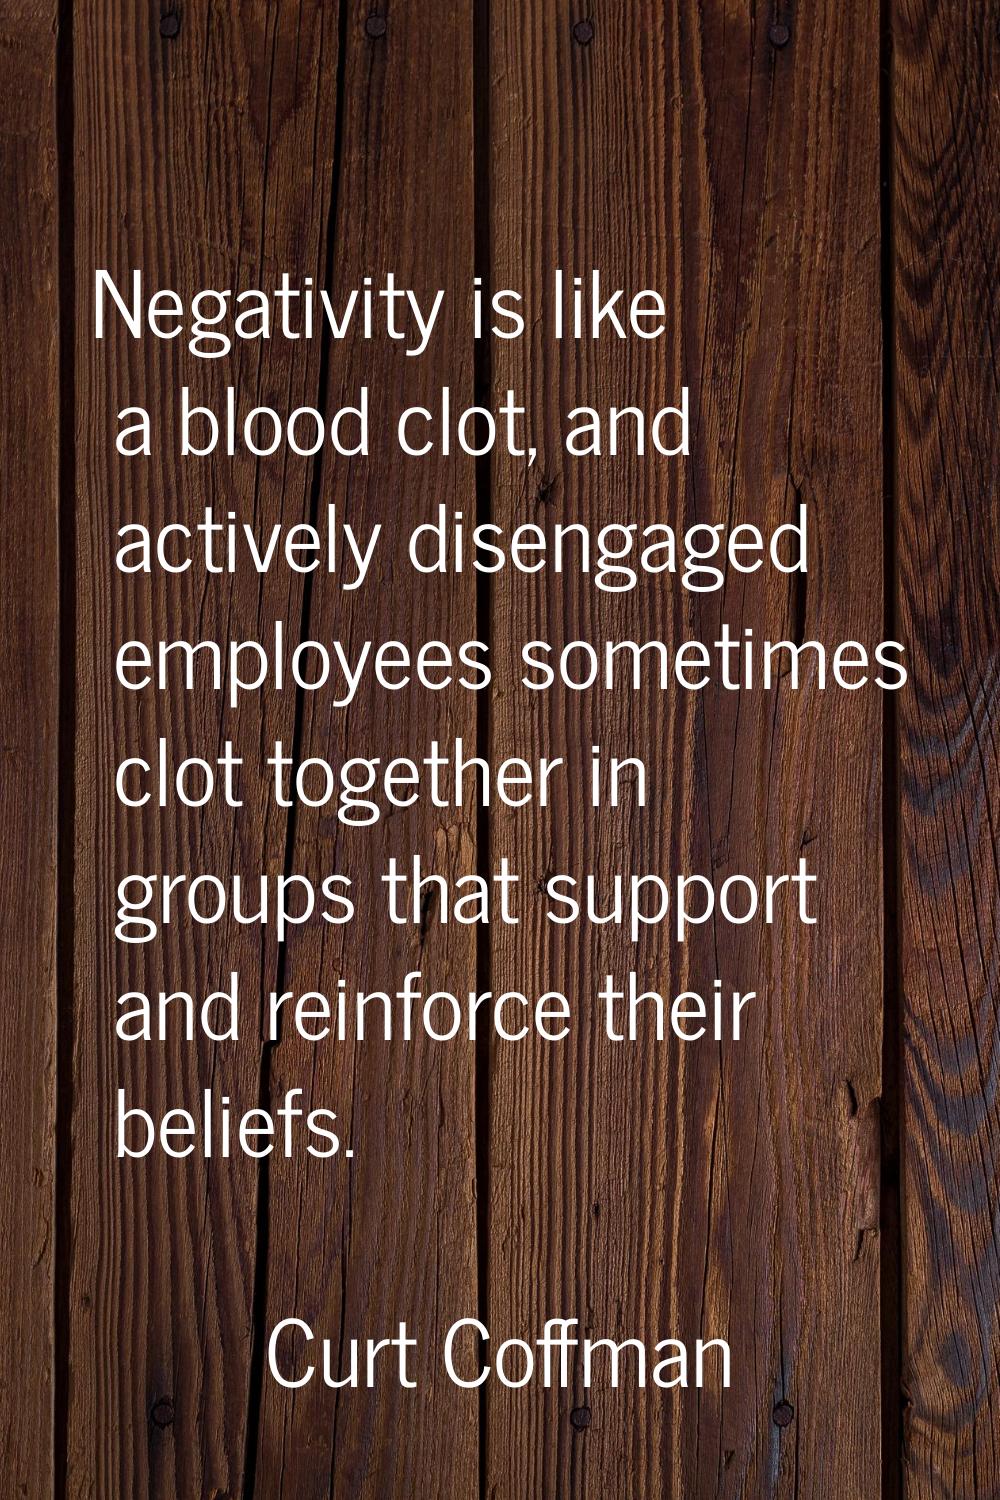 Negativity is like a blood clot, and actively disengaged employees sometimes clot together in group